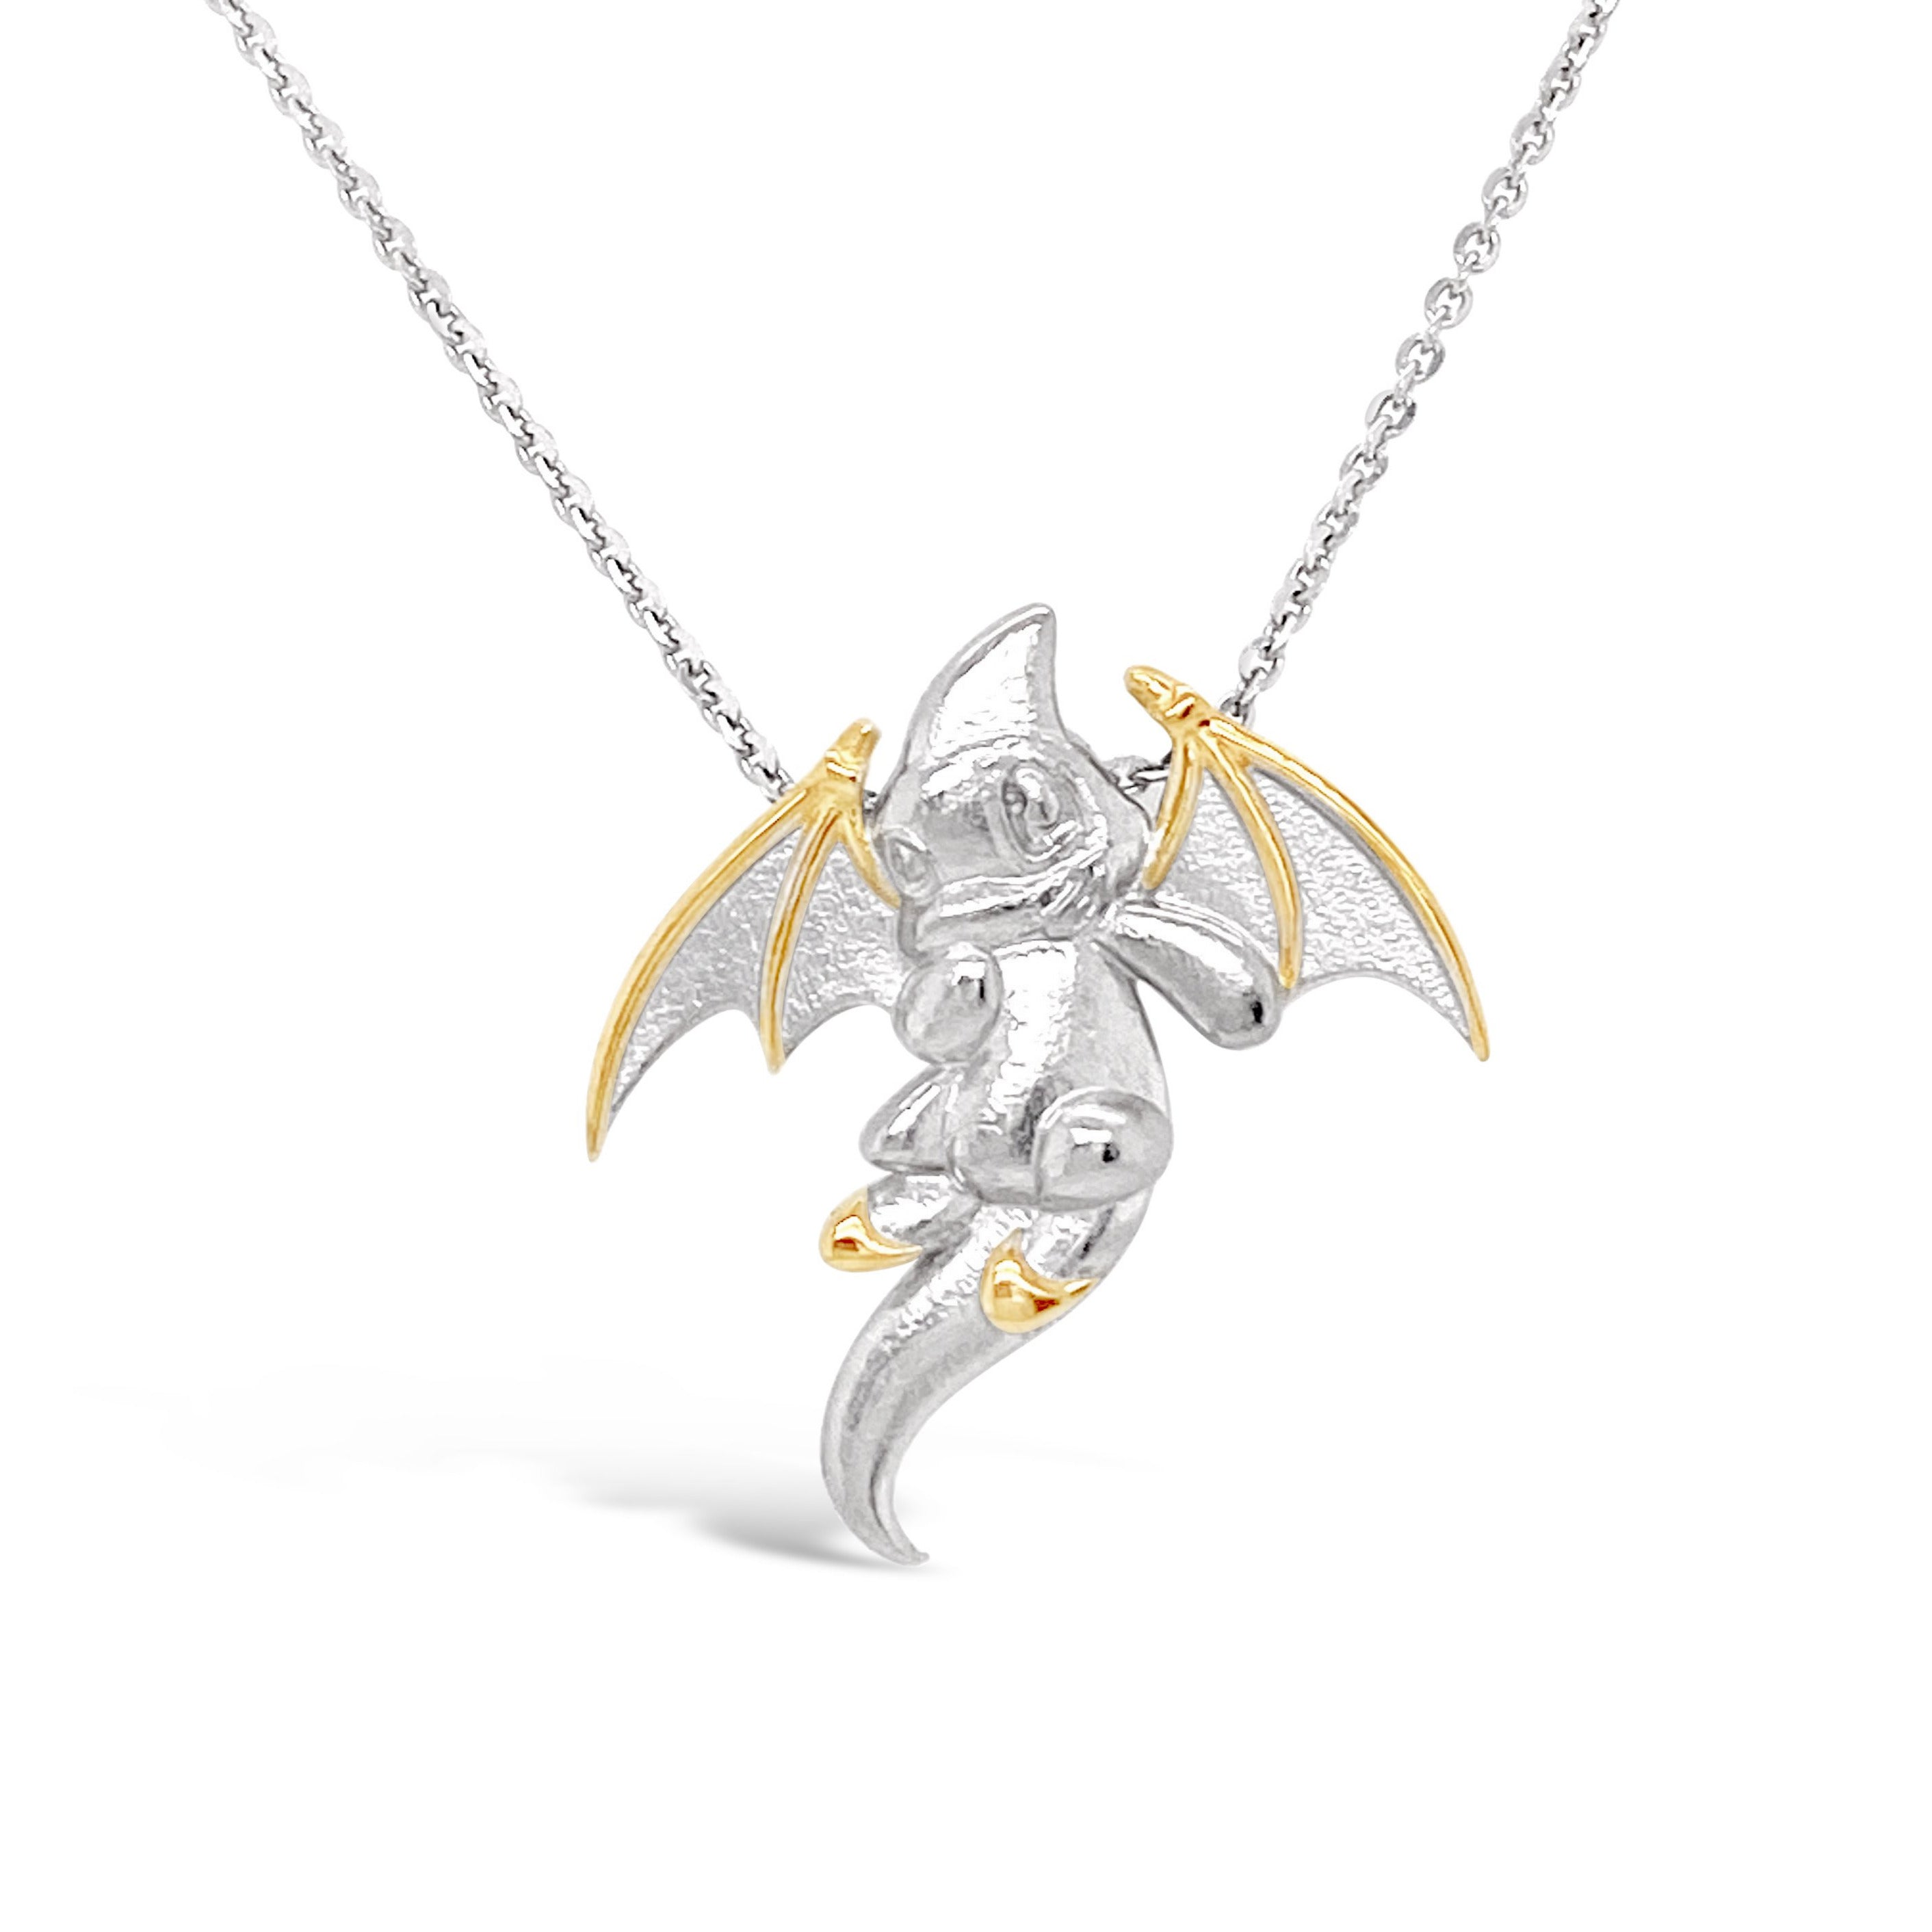 Armory charm necklace in sterling silver or 14k gold